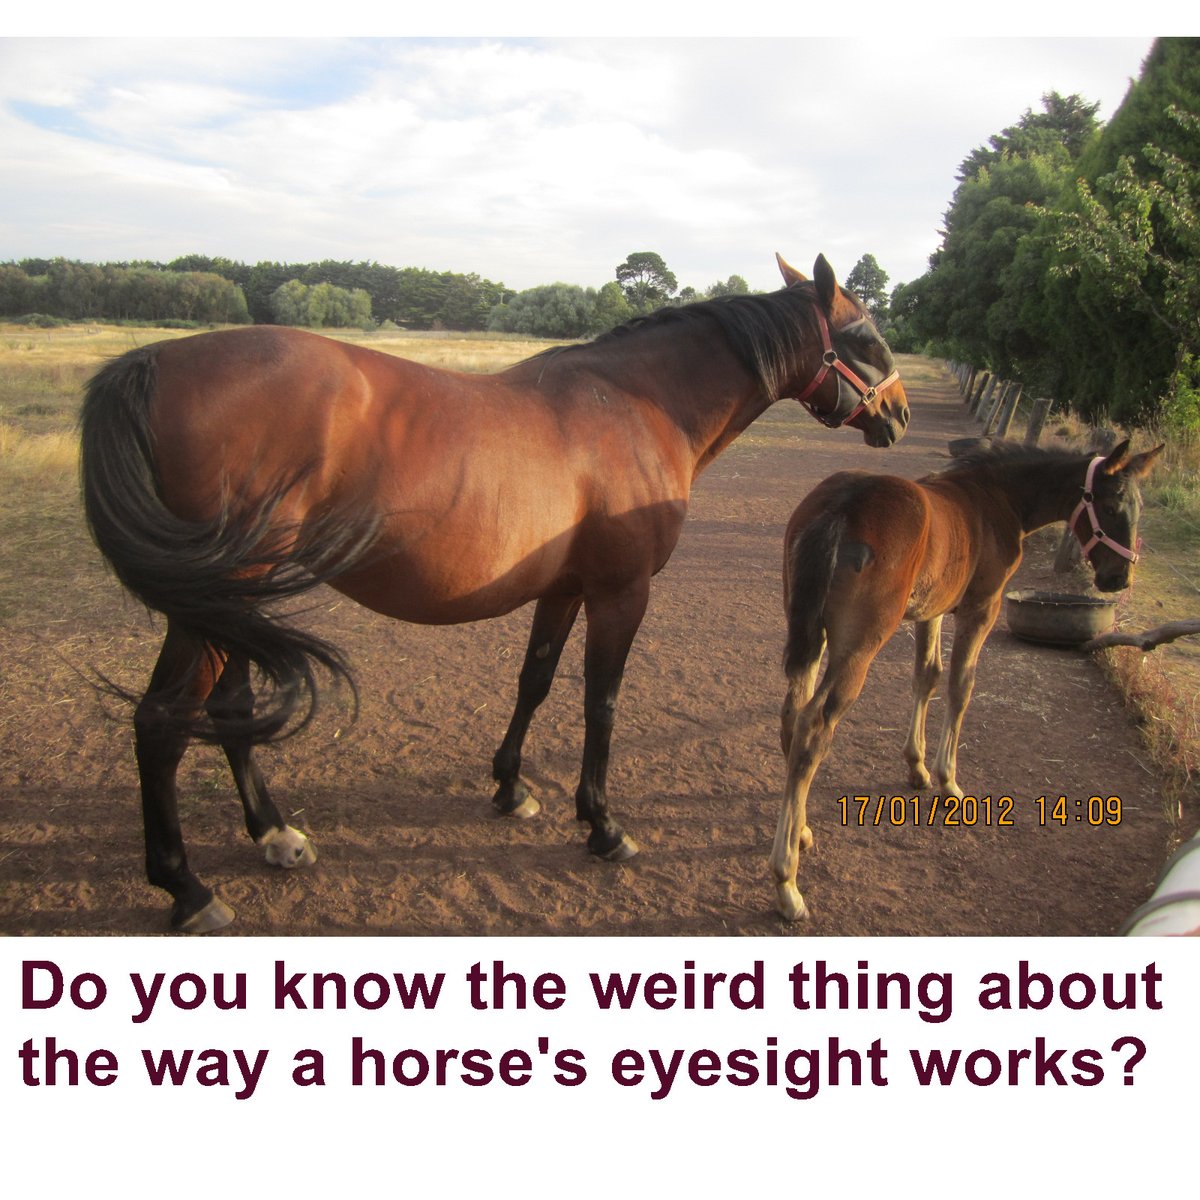 Horses see in a strange way. The details are at 500ways.com/horses-vision (#vision, #eyesight, #horse, #equine, #equestrian, #zoology, #biology, #animalStudies, #farmAnimals, #petHorse, #horesback)